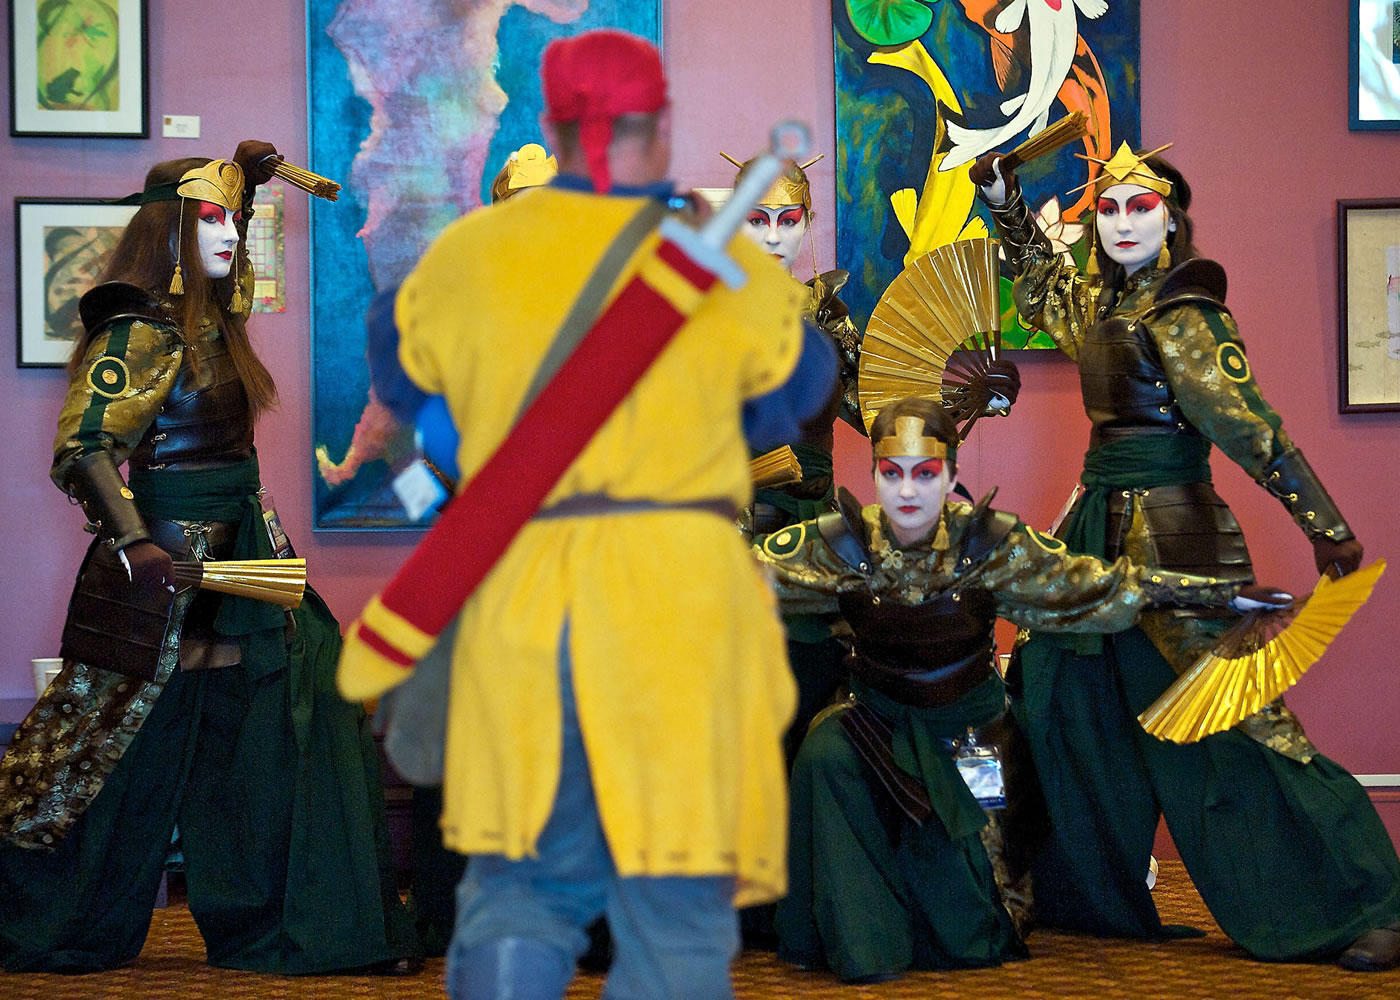 Kumoricon attendees from Salem, Ore., dressed as Kyoshi Warriors from the Nickelodeon series &quot;Avatar: The Last Airbender&quot; pose for a photograph in 2013.